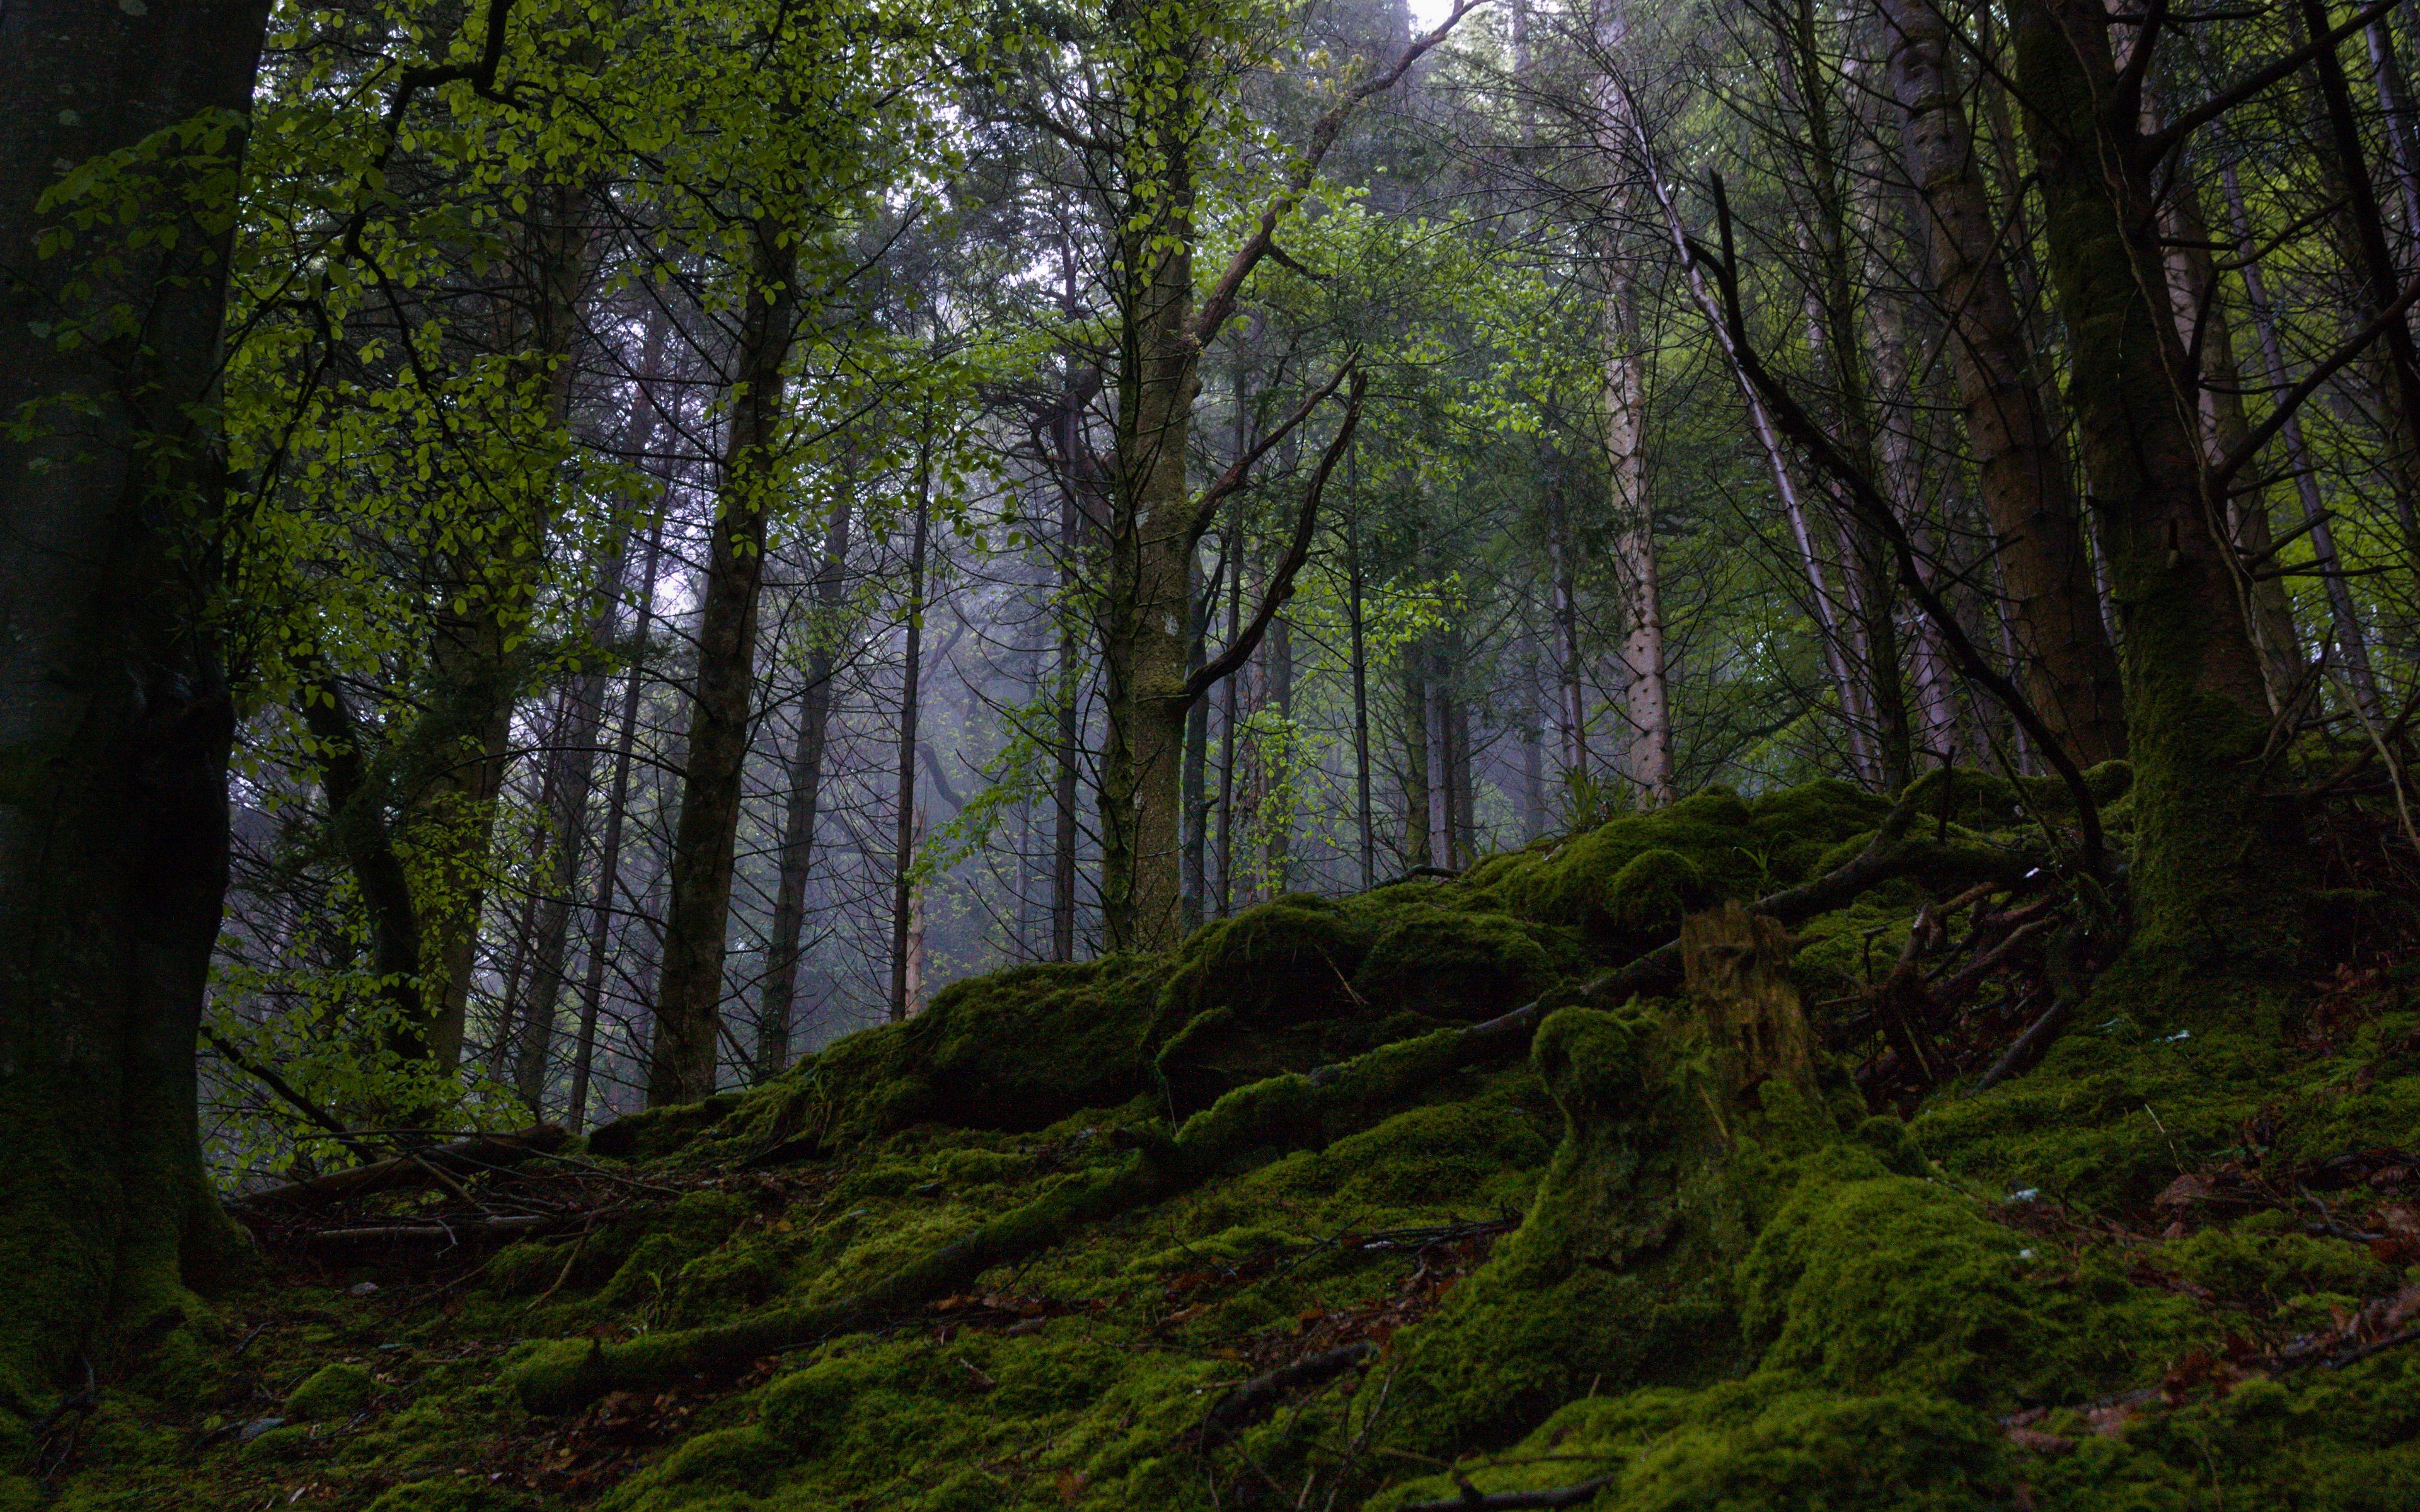 Download wallpaper 3840x2400 forest, trees, moss, nature, landscape ...